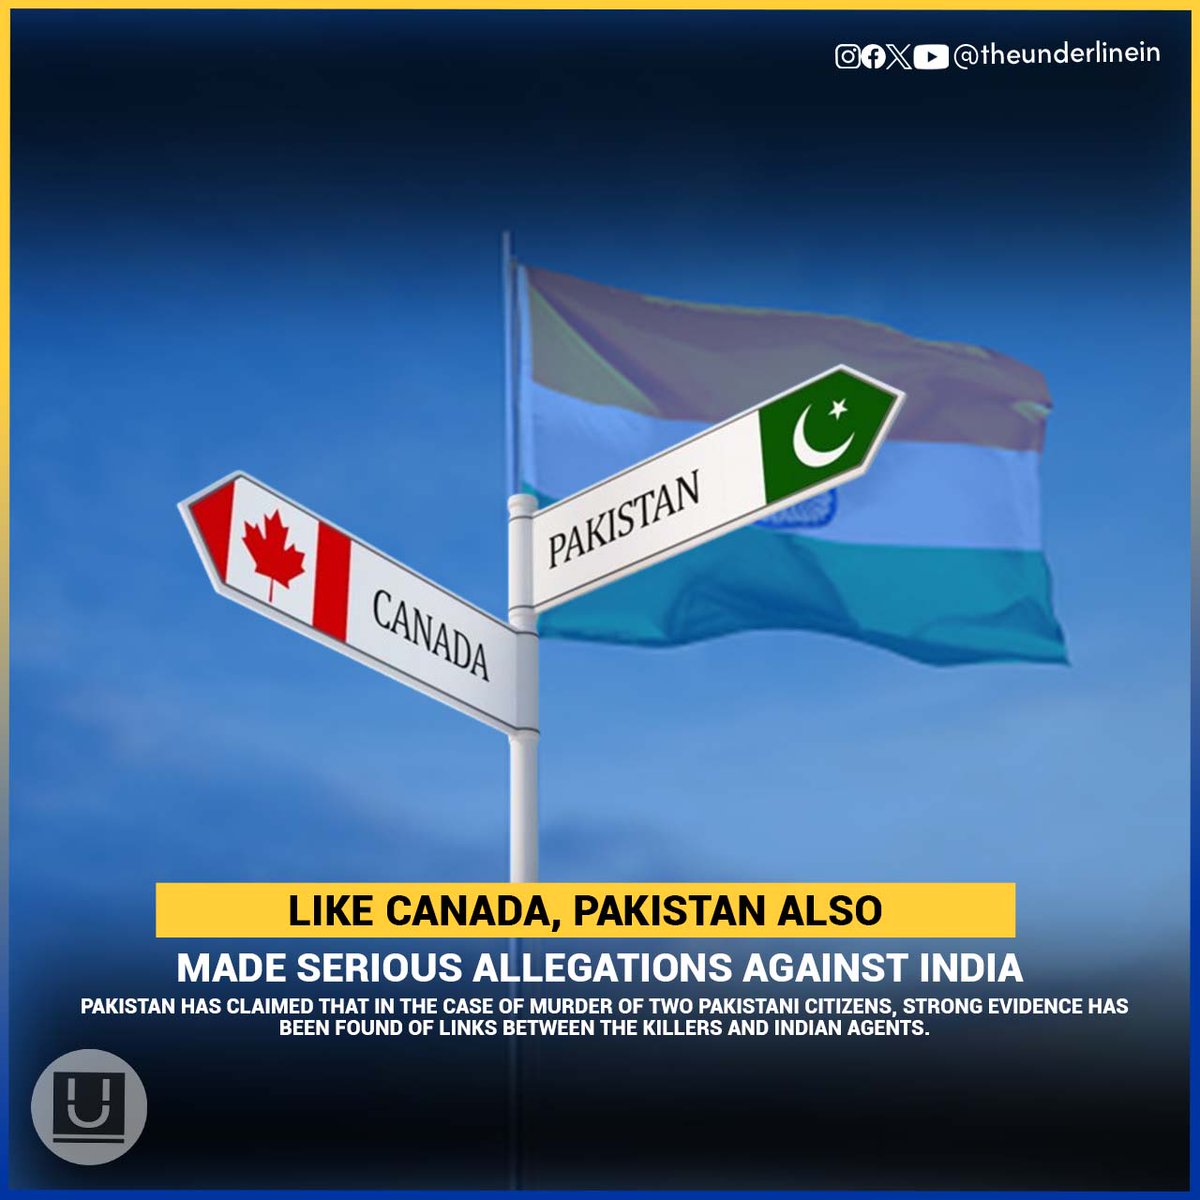 Like Canada, Pakistan also made serious allegations against India

#Canada #Pakistan #PakistanArmy #CanadaIndia #indiaPakistan #Khalistan #JustinTrudeau 

Pakistan has claimed that in the case of murder of two Pakistani citizens, strong evidence has been found of links between